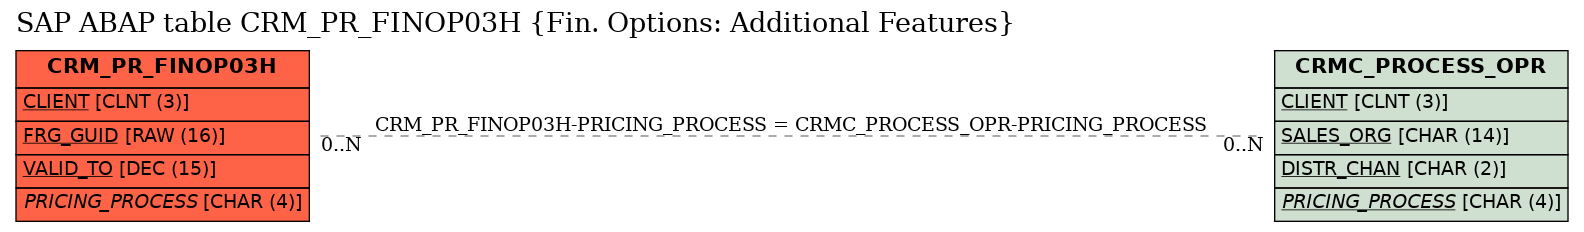 E-R Diagram for table CRM_PR_FINOP03H (Fin. Options: Additional Features)